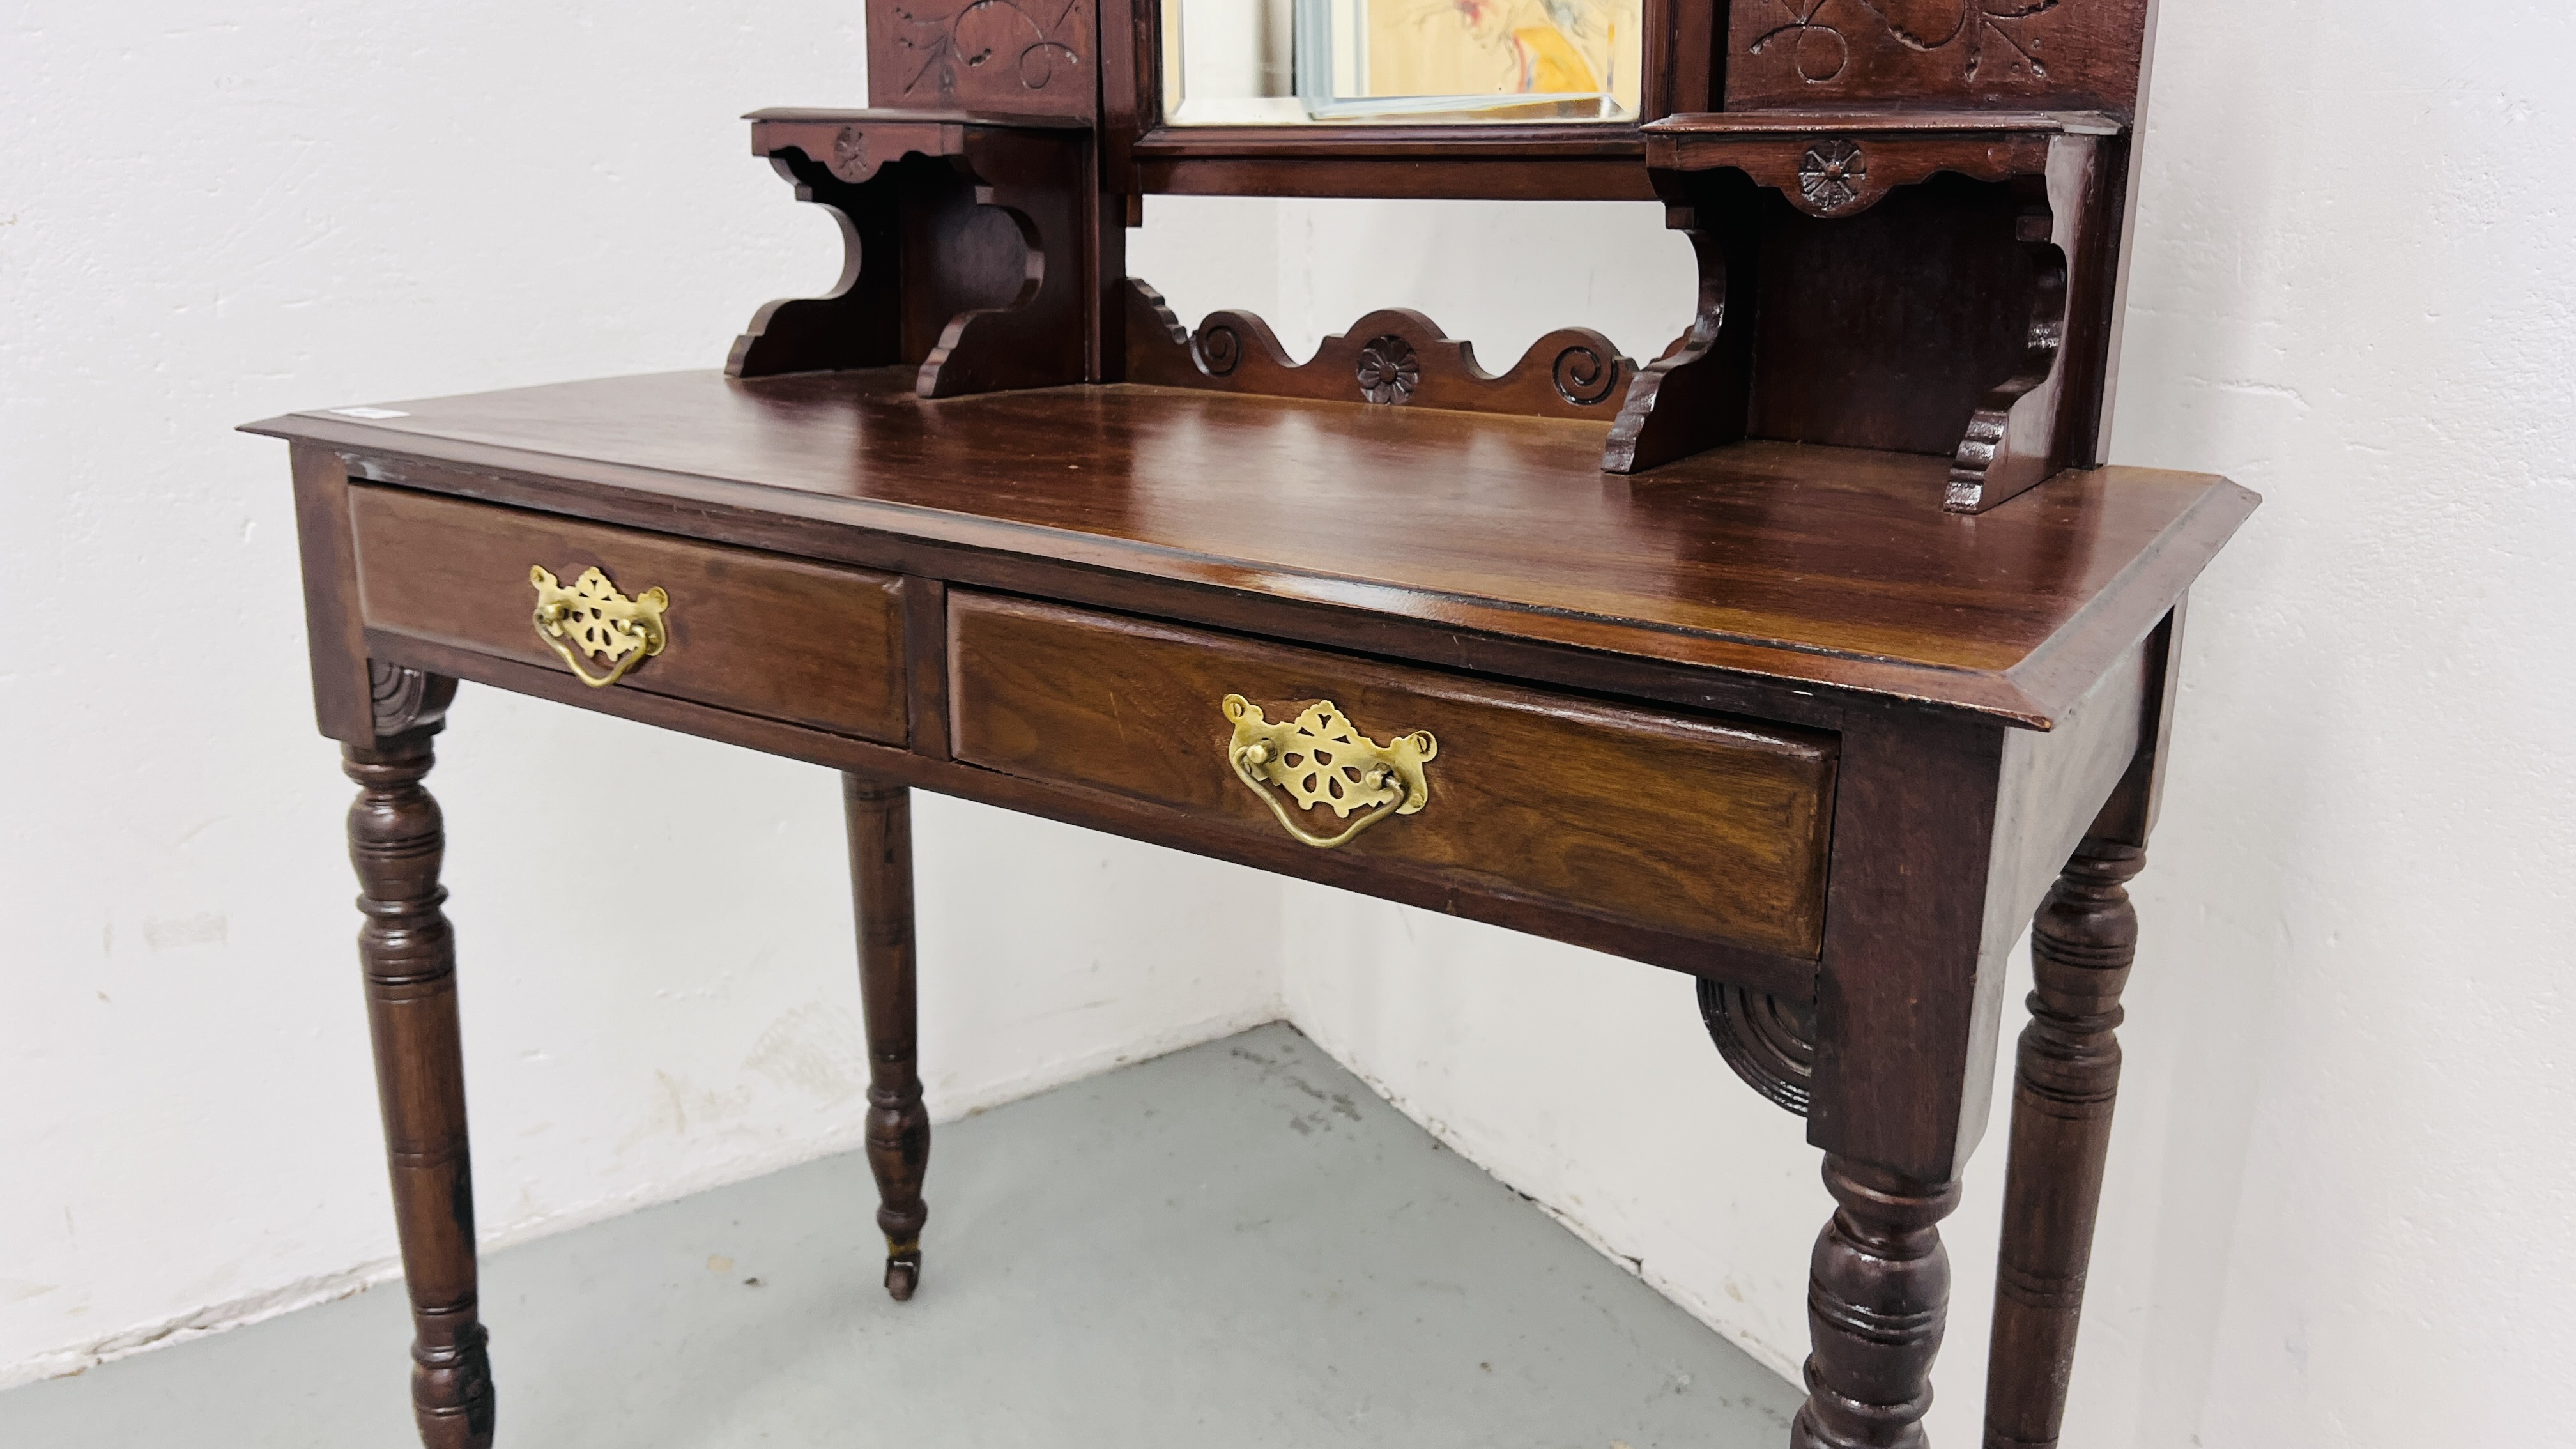 EDWARDIAN MAHOGANY TWO DRAWER DRESSING TABLE, CENTRAL MIRROR ON TURNED LEGS WIDTH 91CM. DEPTH 43CM. - Image 5 of 7